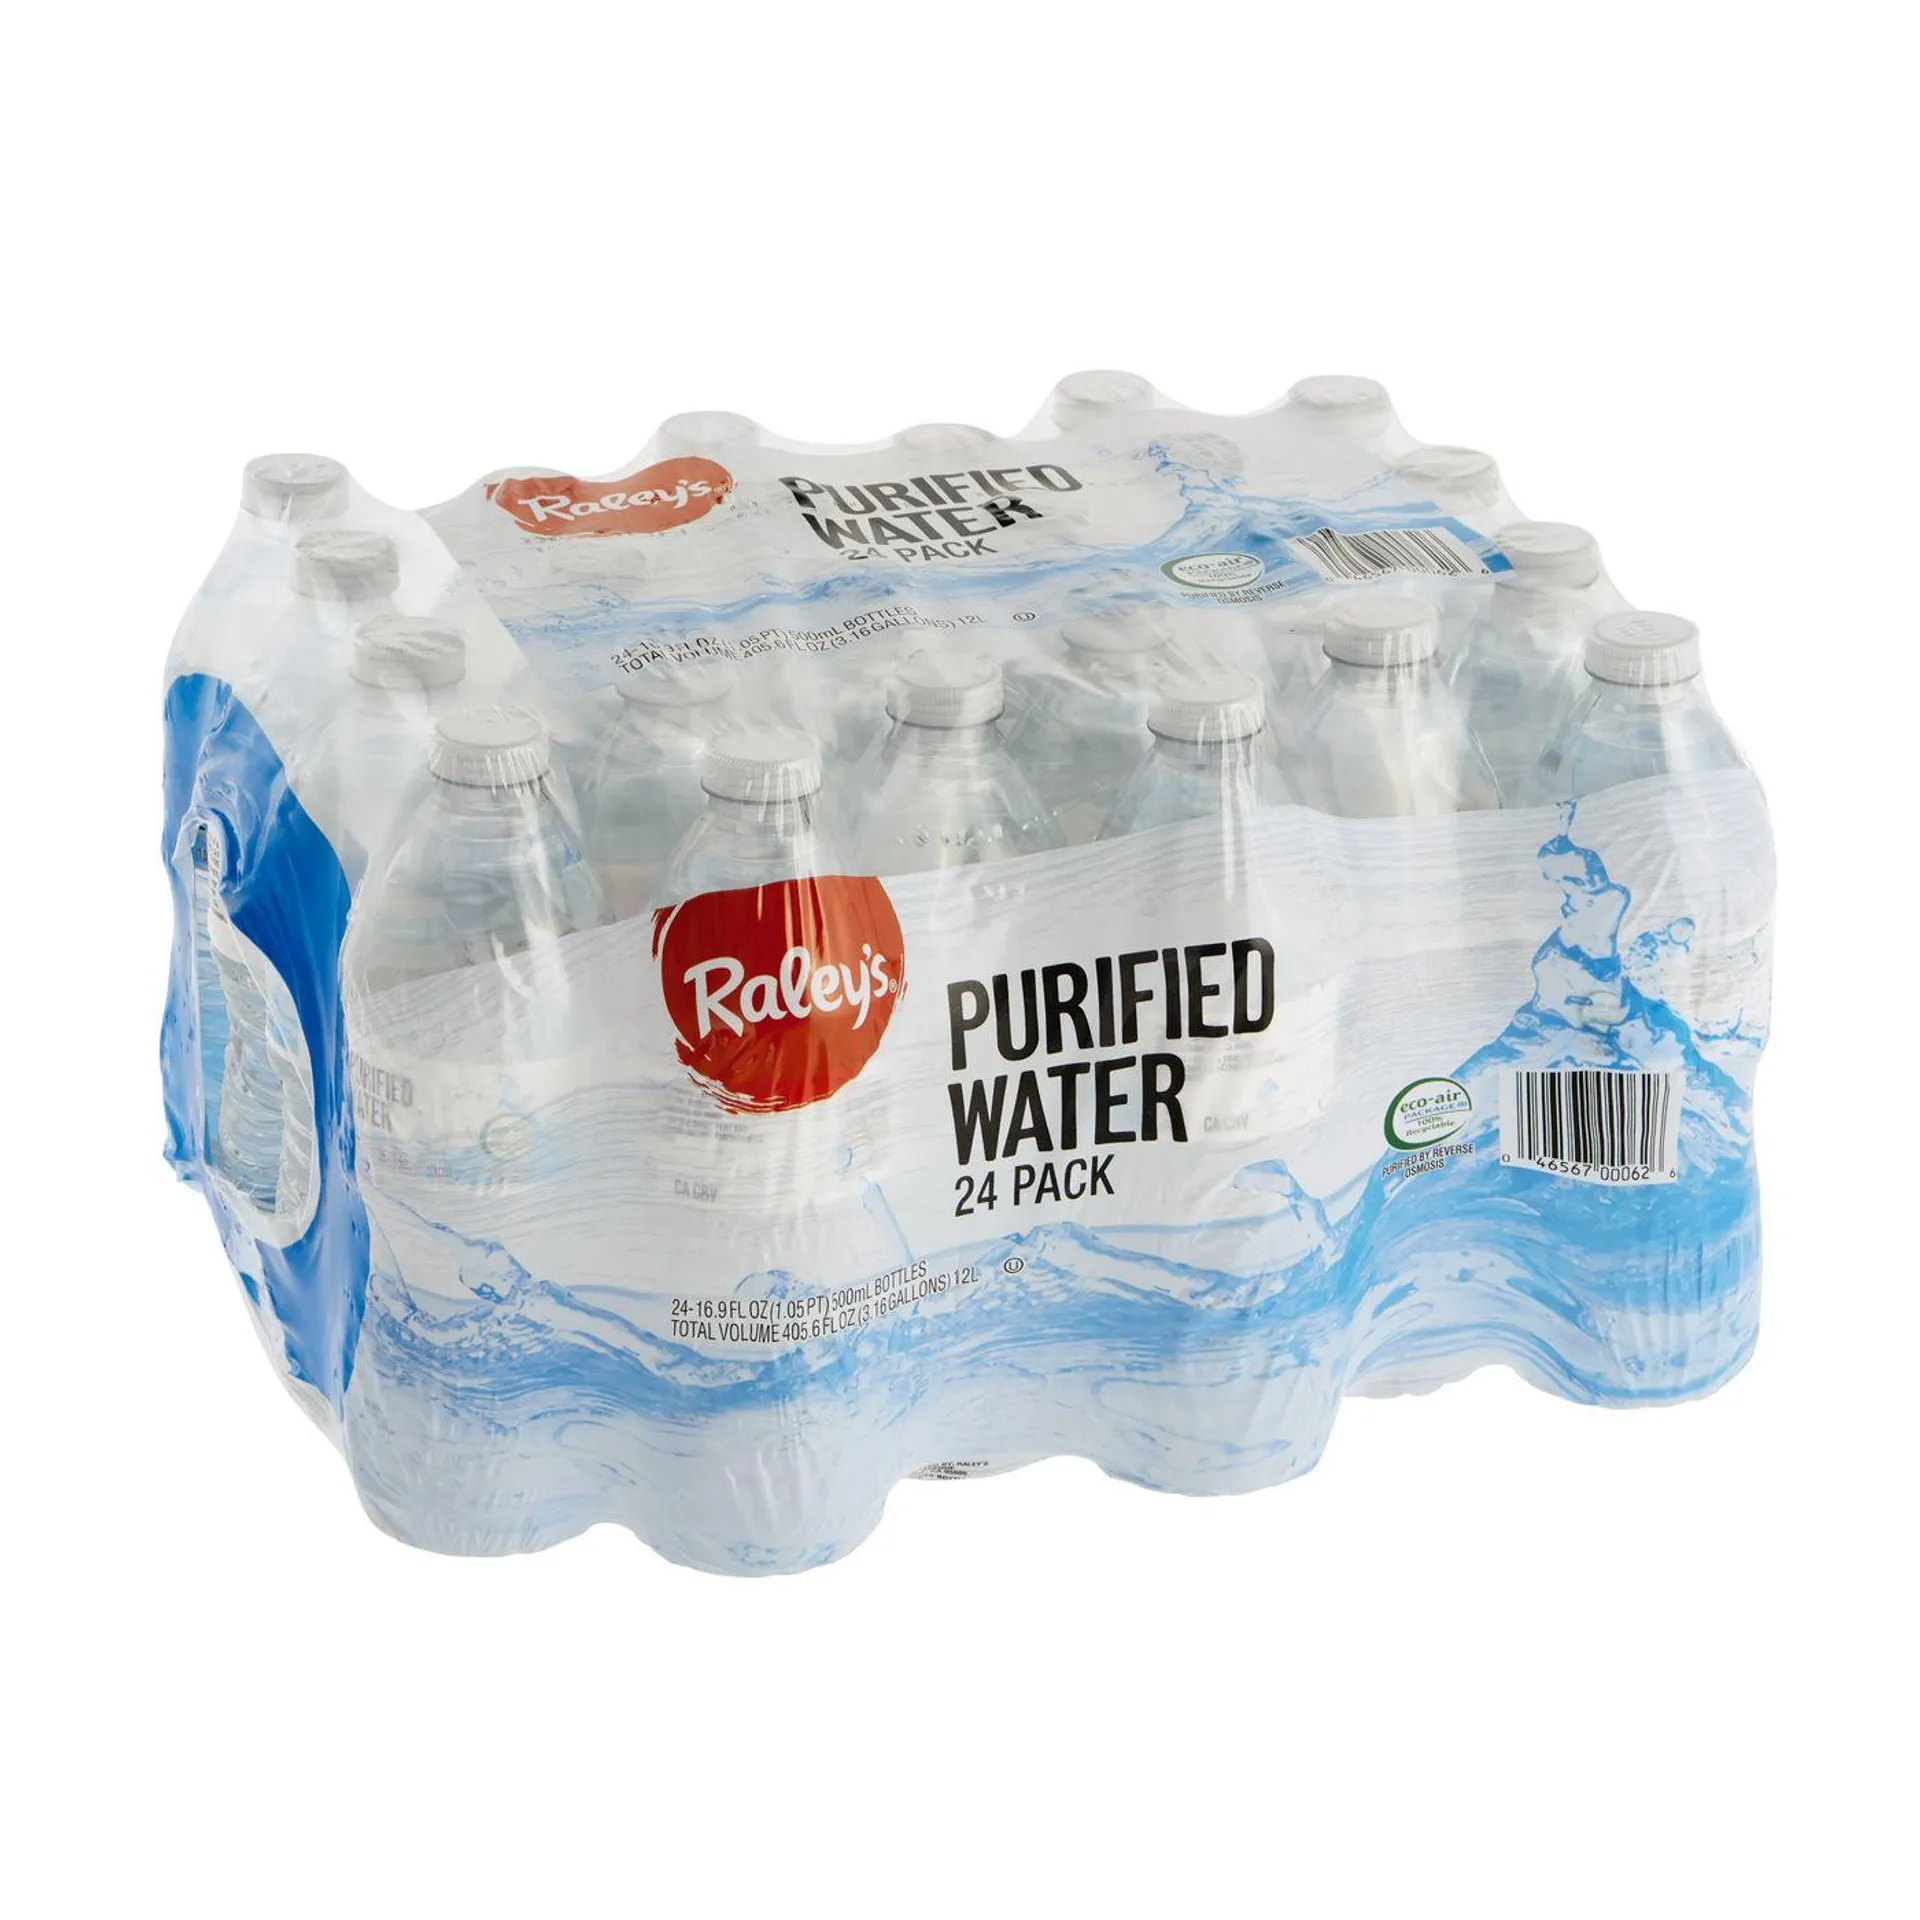 Raley's Purified Water, 24 Pack